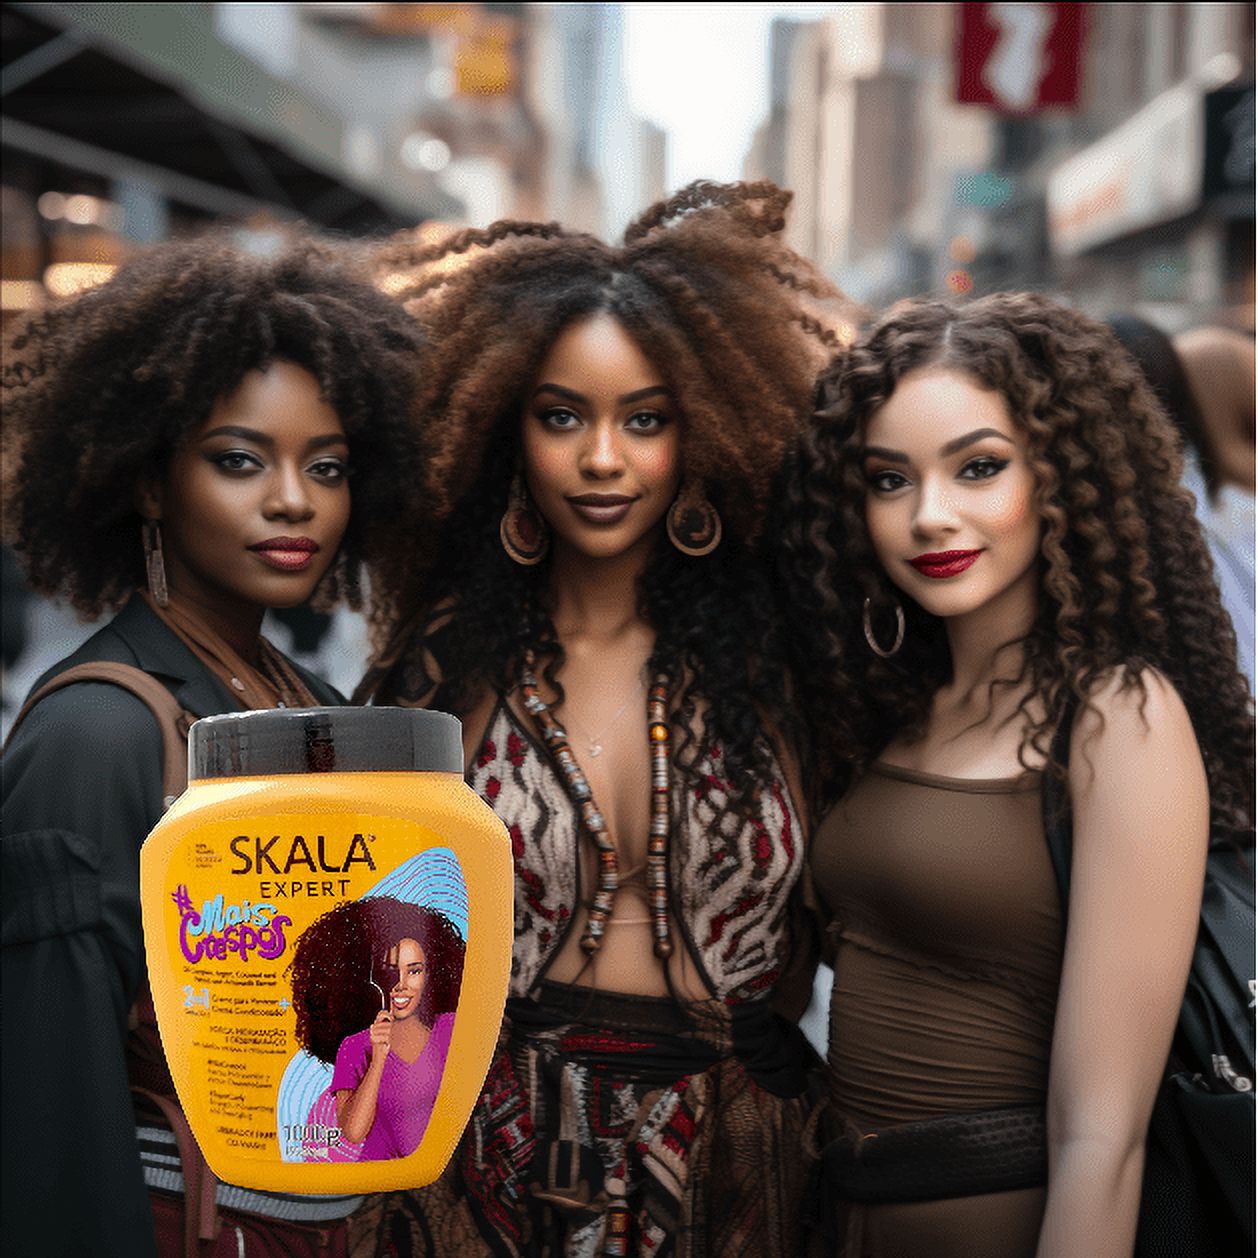 Skala Expert Mais Crespos Hair Treatment for Curly and Afro Hair: Perfect and Defined curls,Hydration and Softness in a Single Product - image 4 of 9